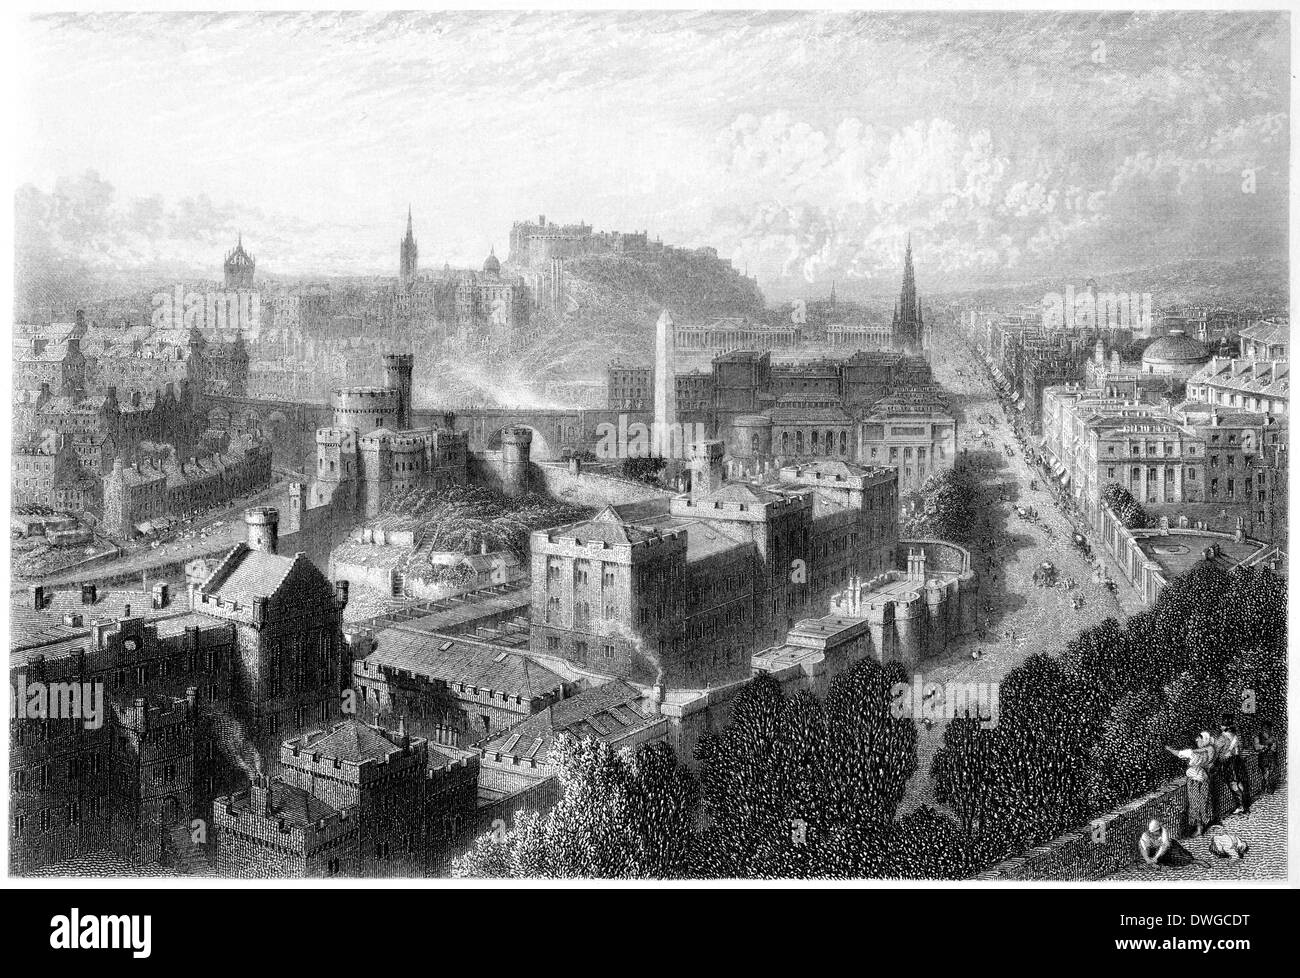 An engraving entitled 'Edinburgh from Calton Hill' scanned at high resolution from a book published in 1876. Believed copyright free. Stock Photo